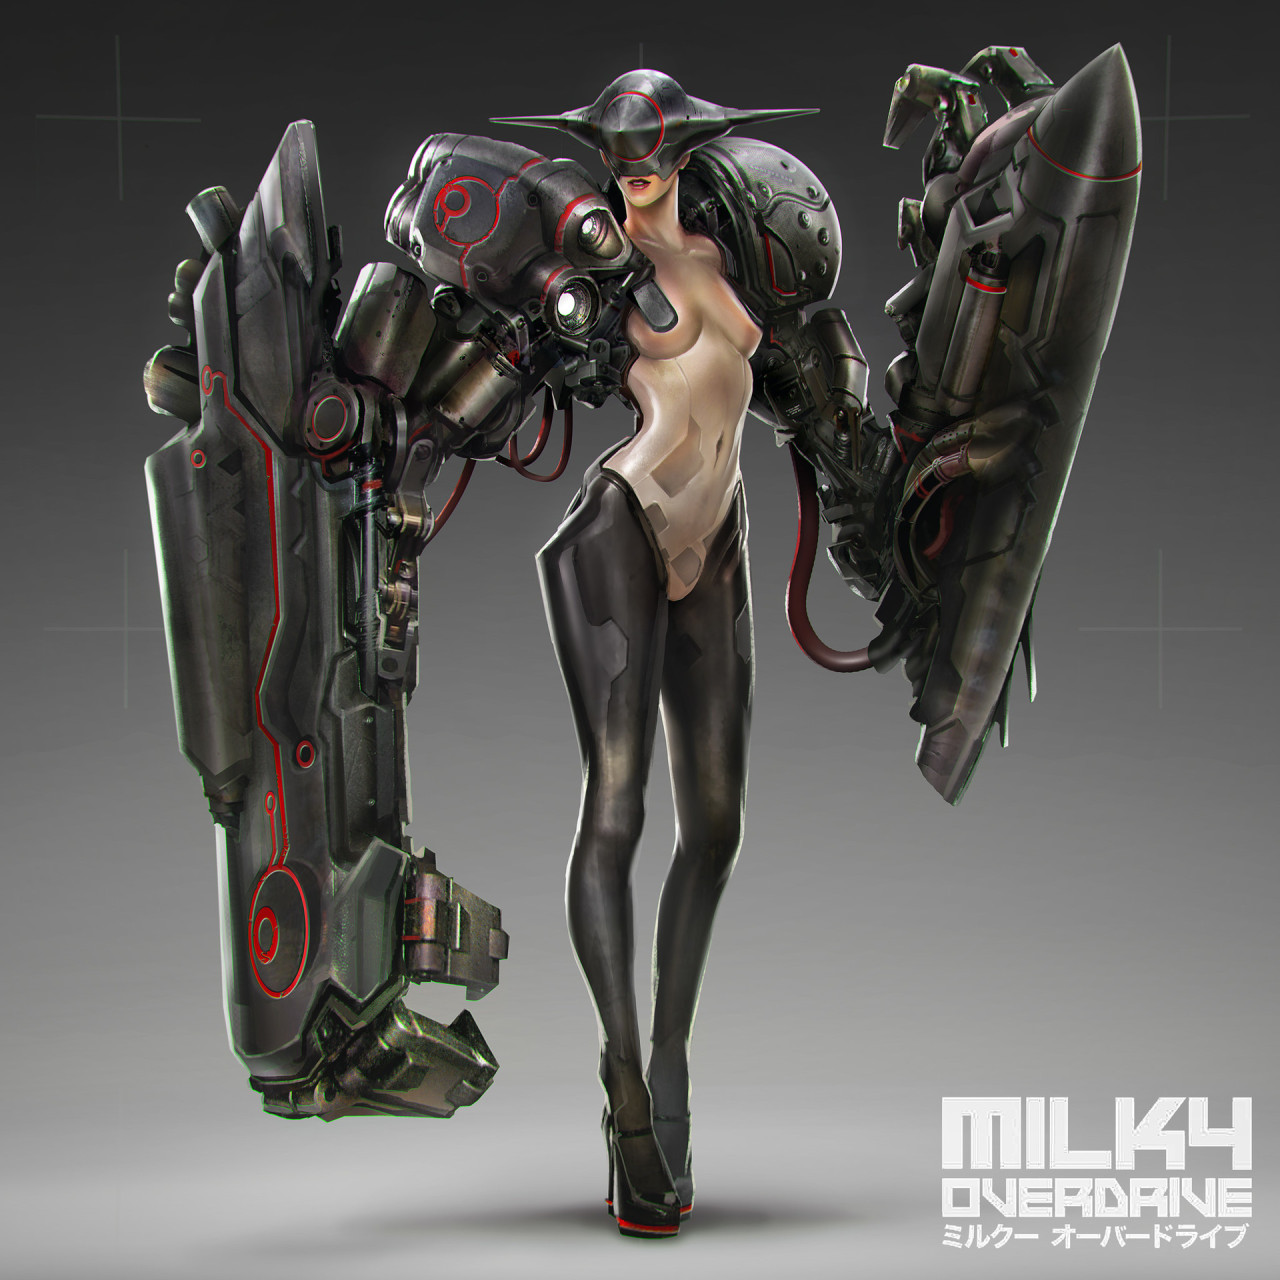 cyberclays:  MILKY OVERDRIVE  - by  jarold Sng   “Milky Overdrive was a collaboration